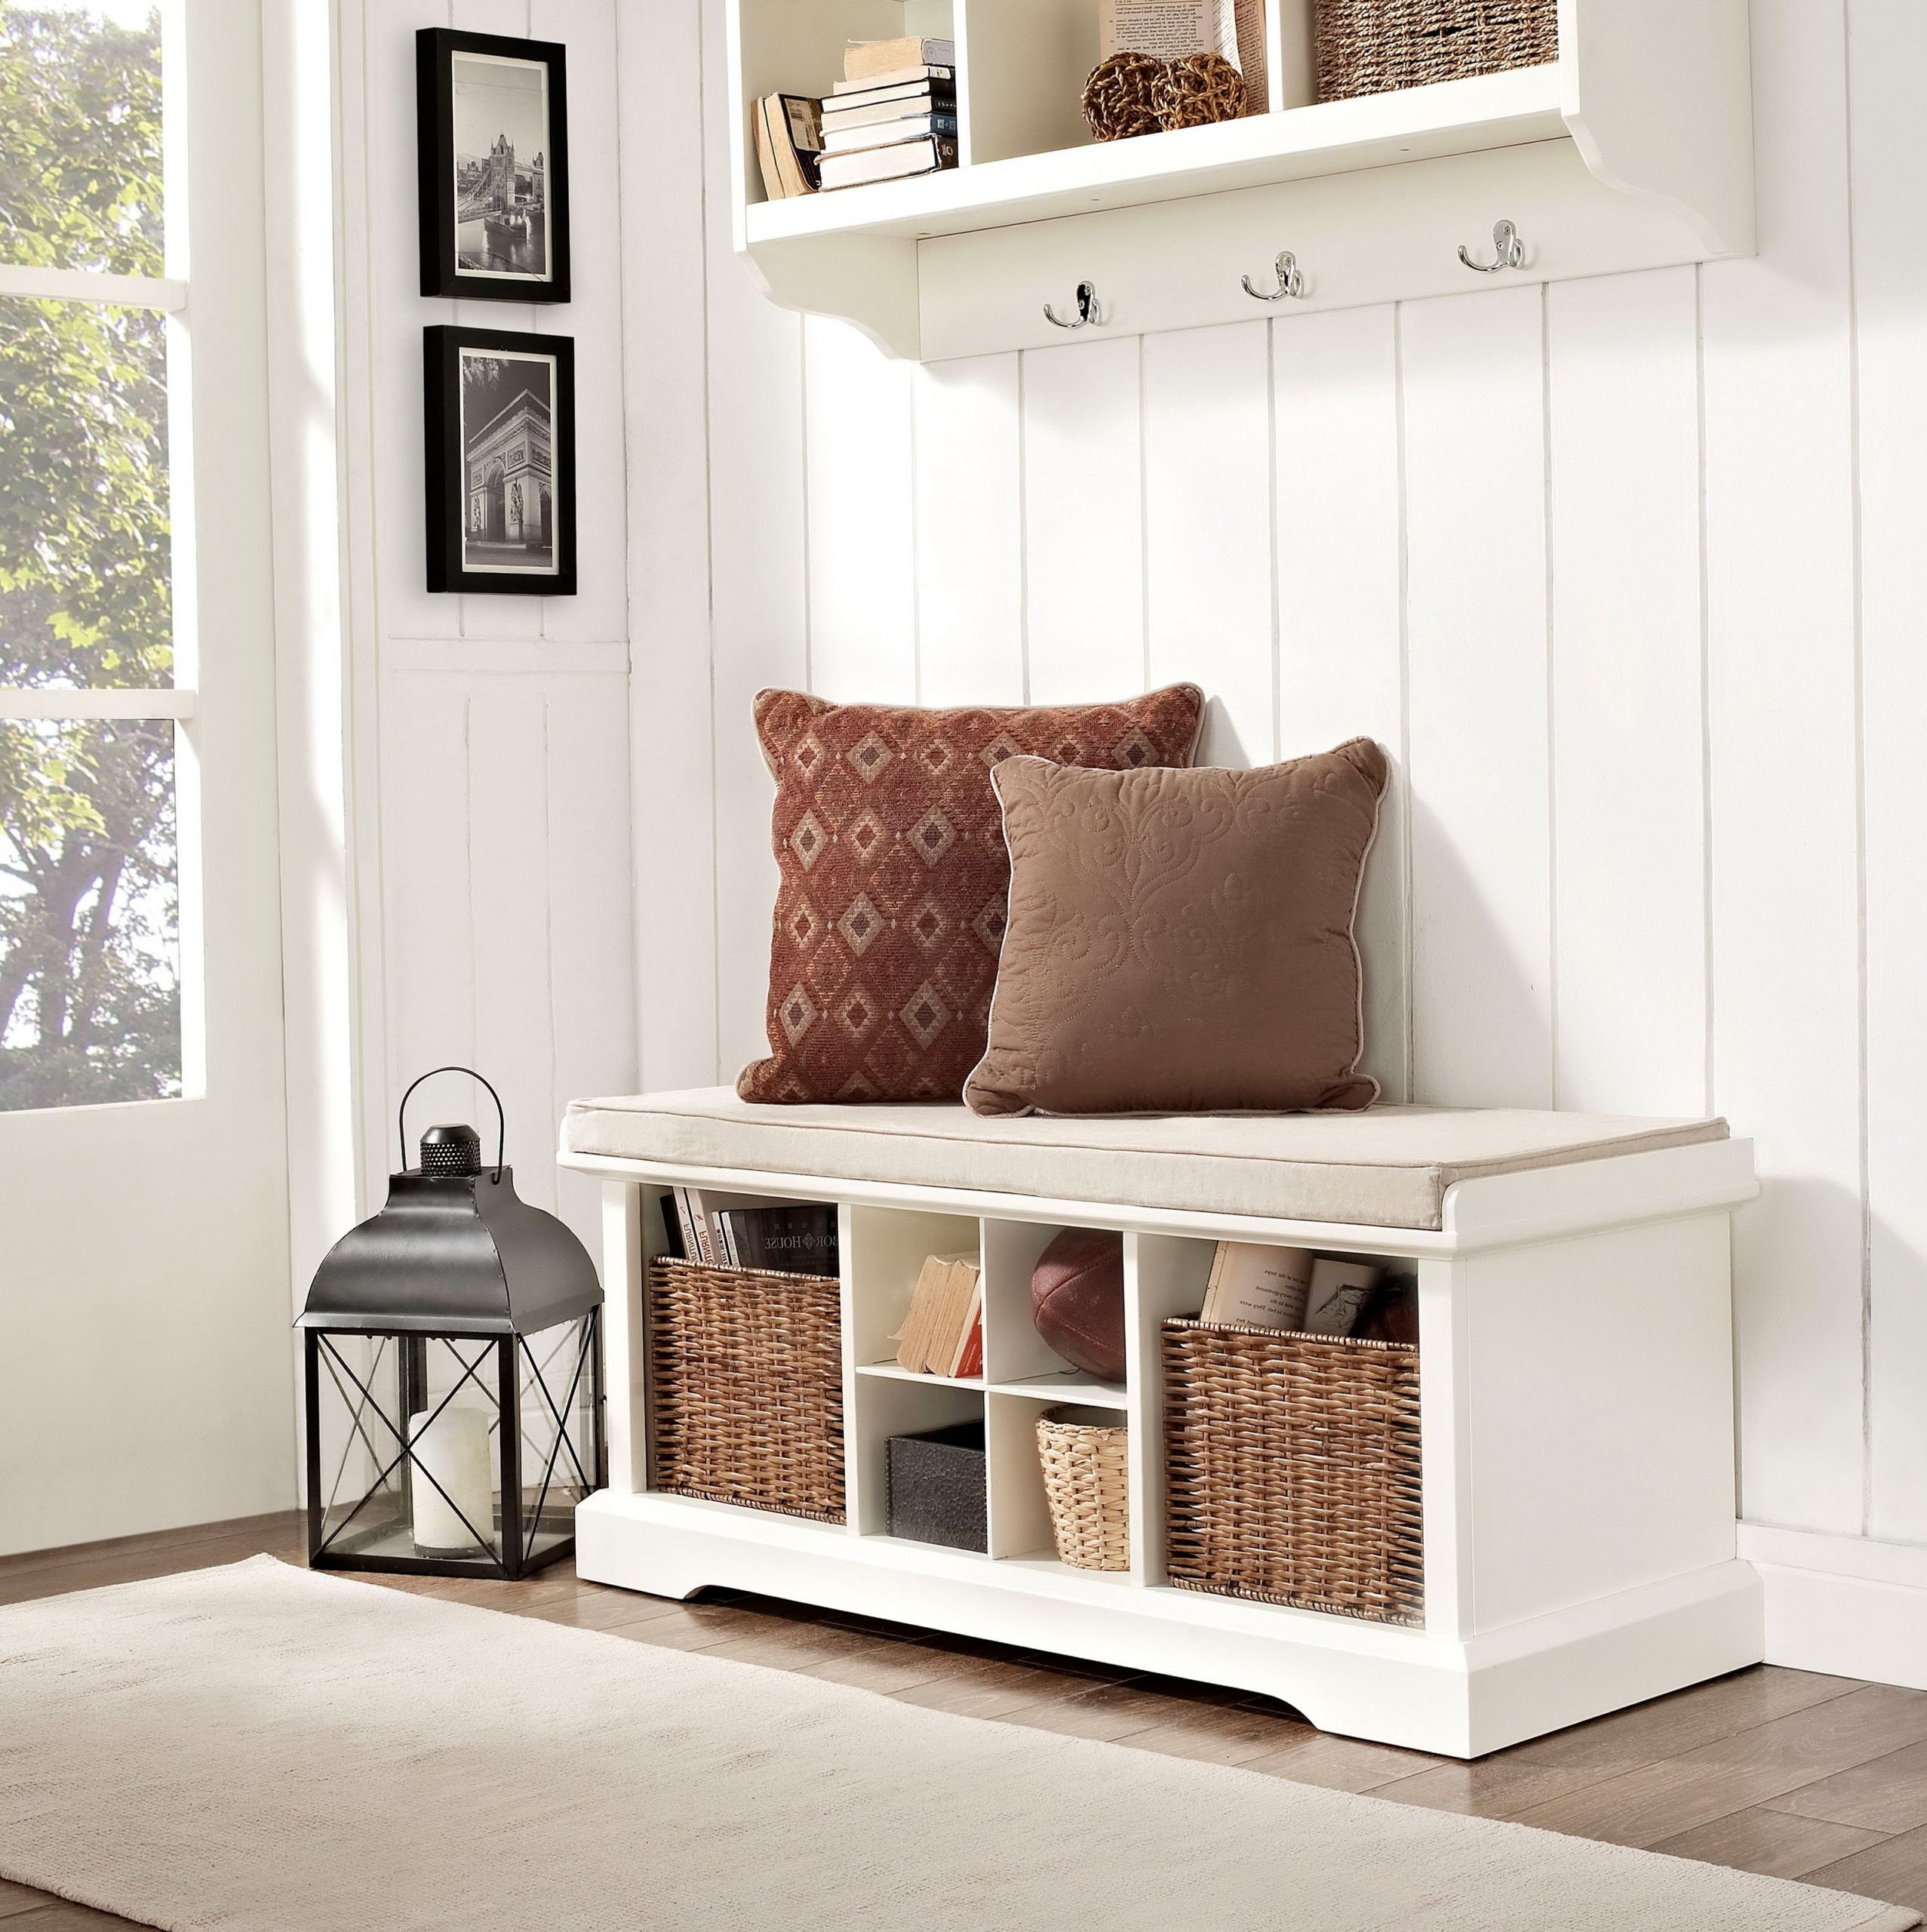 White Entryway Storage Benches
 The Best White Entryway Bench Best Collections Ever